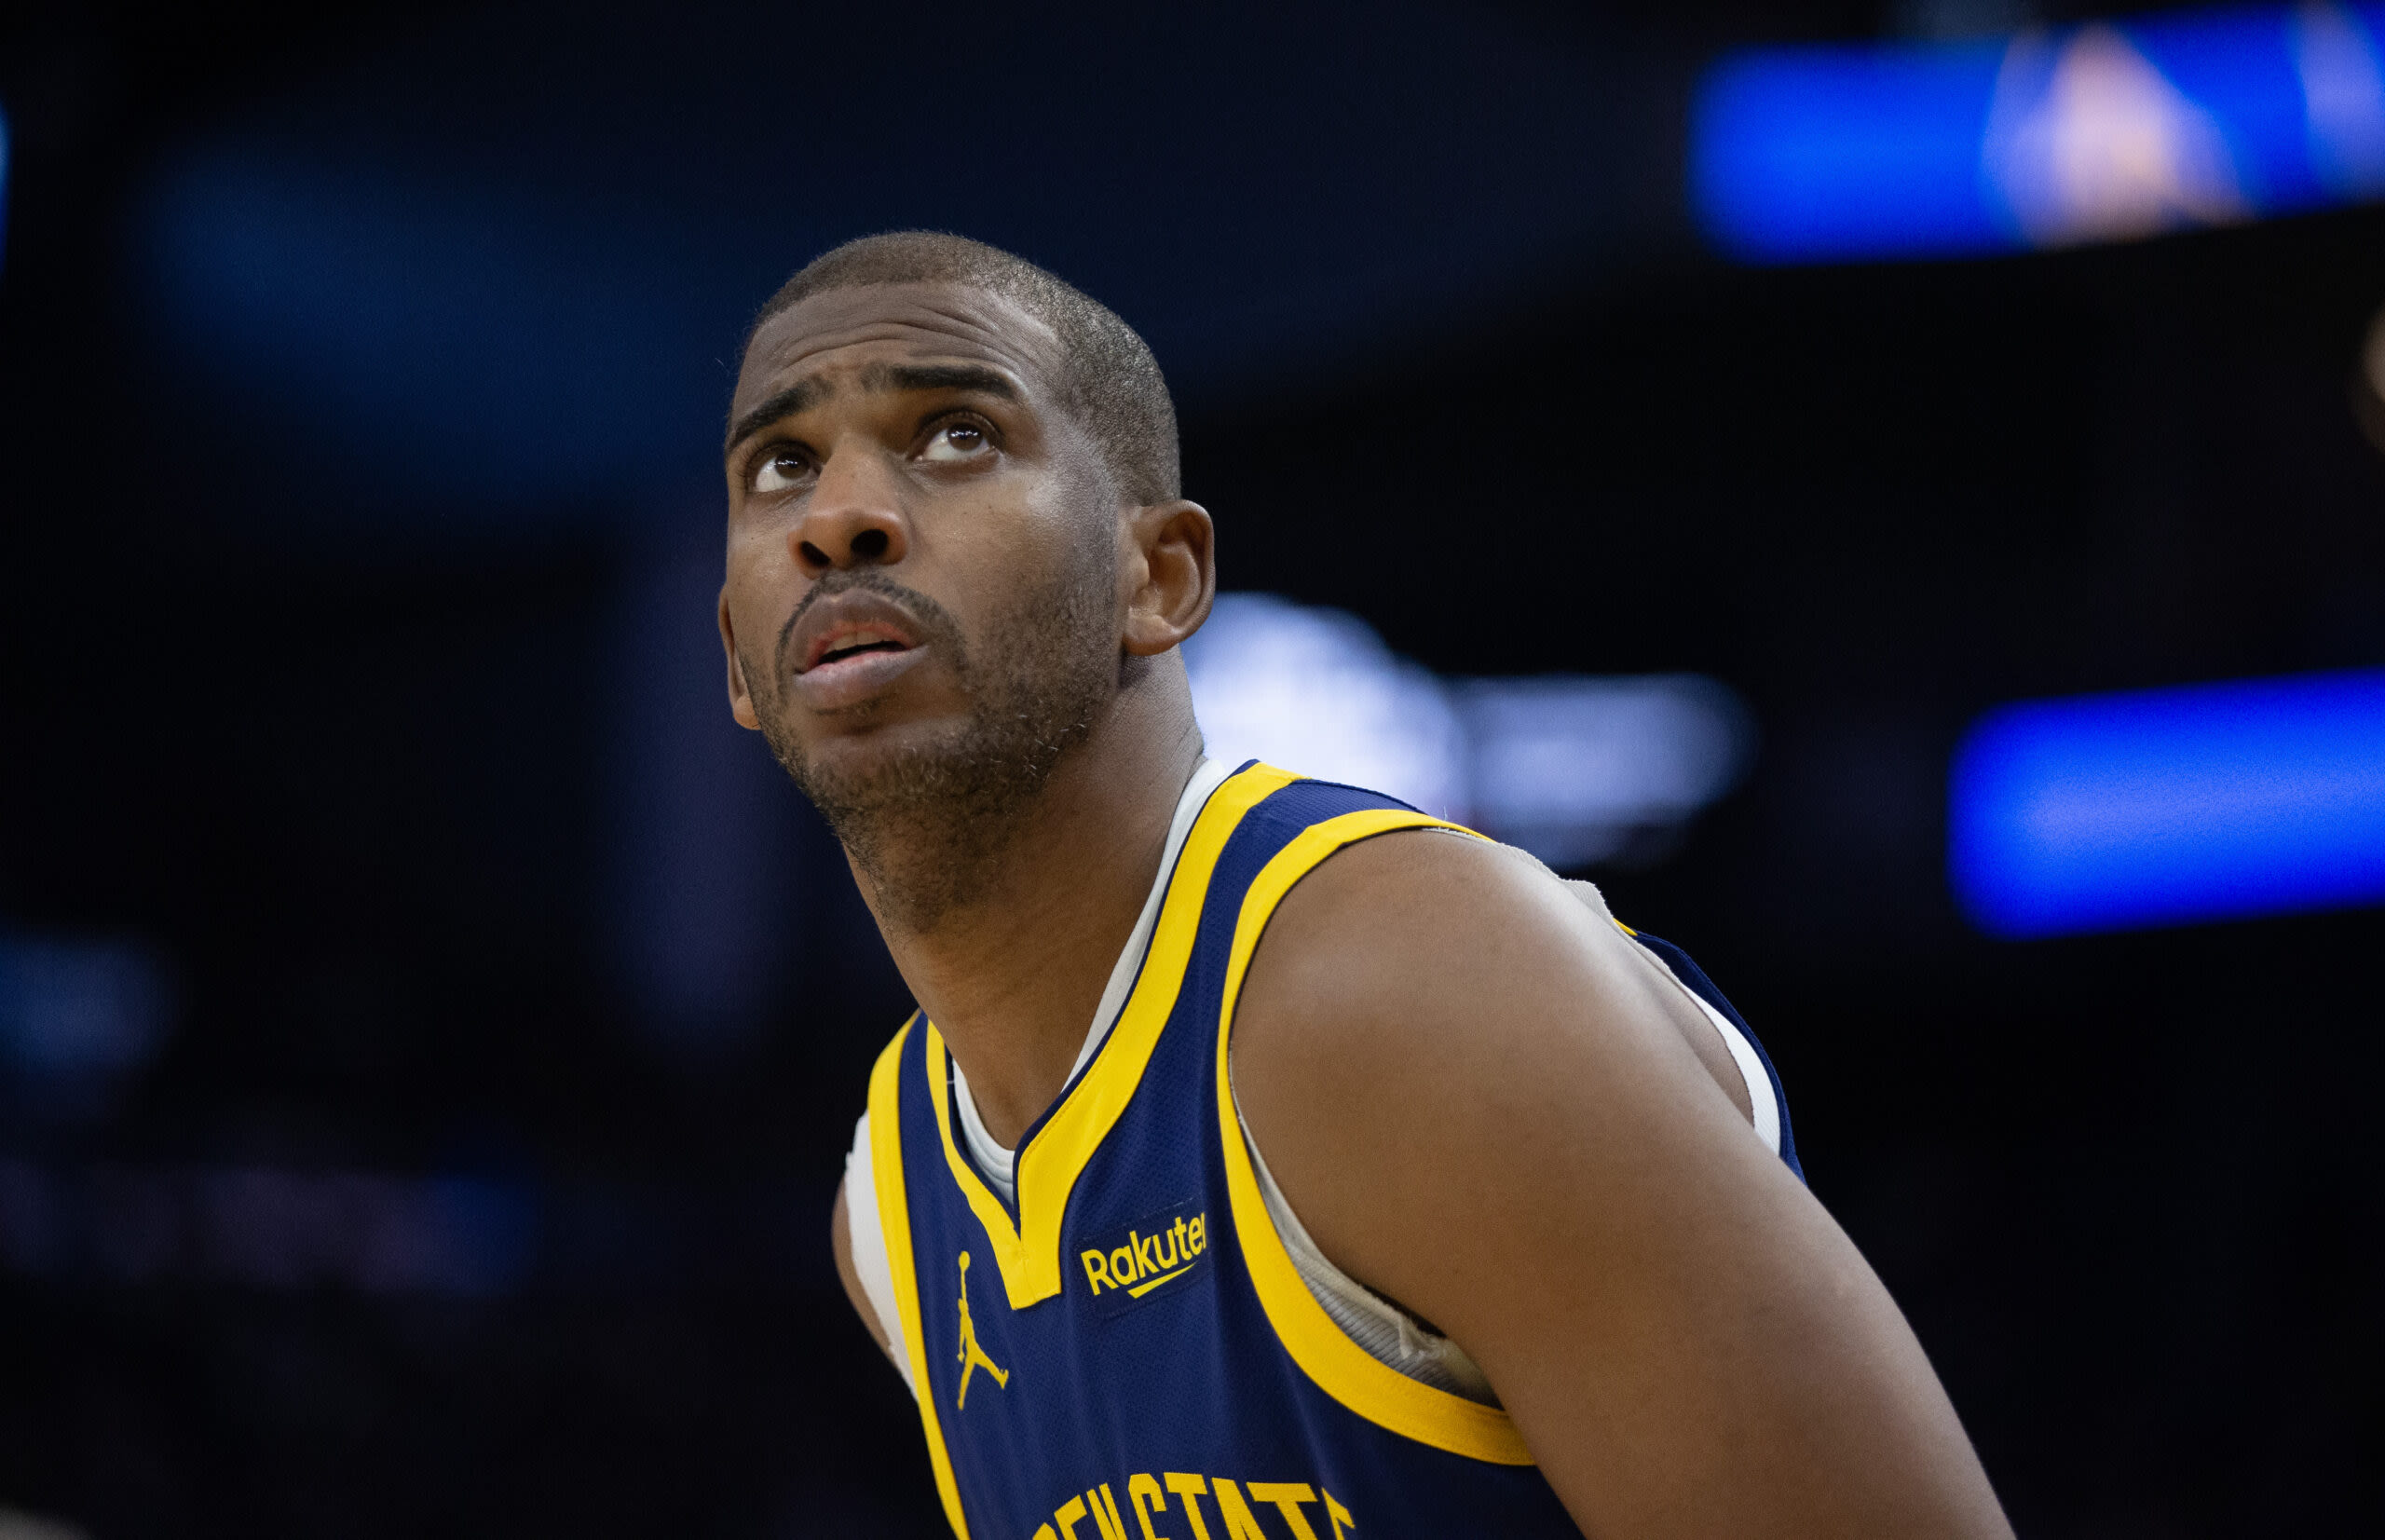 Warriors release highlights of Chris Paul’s best moments this season